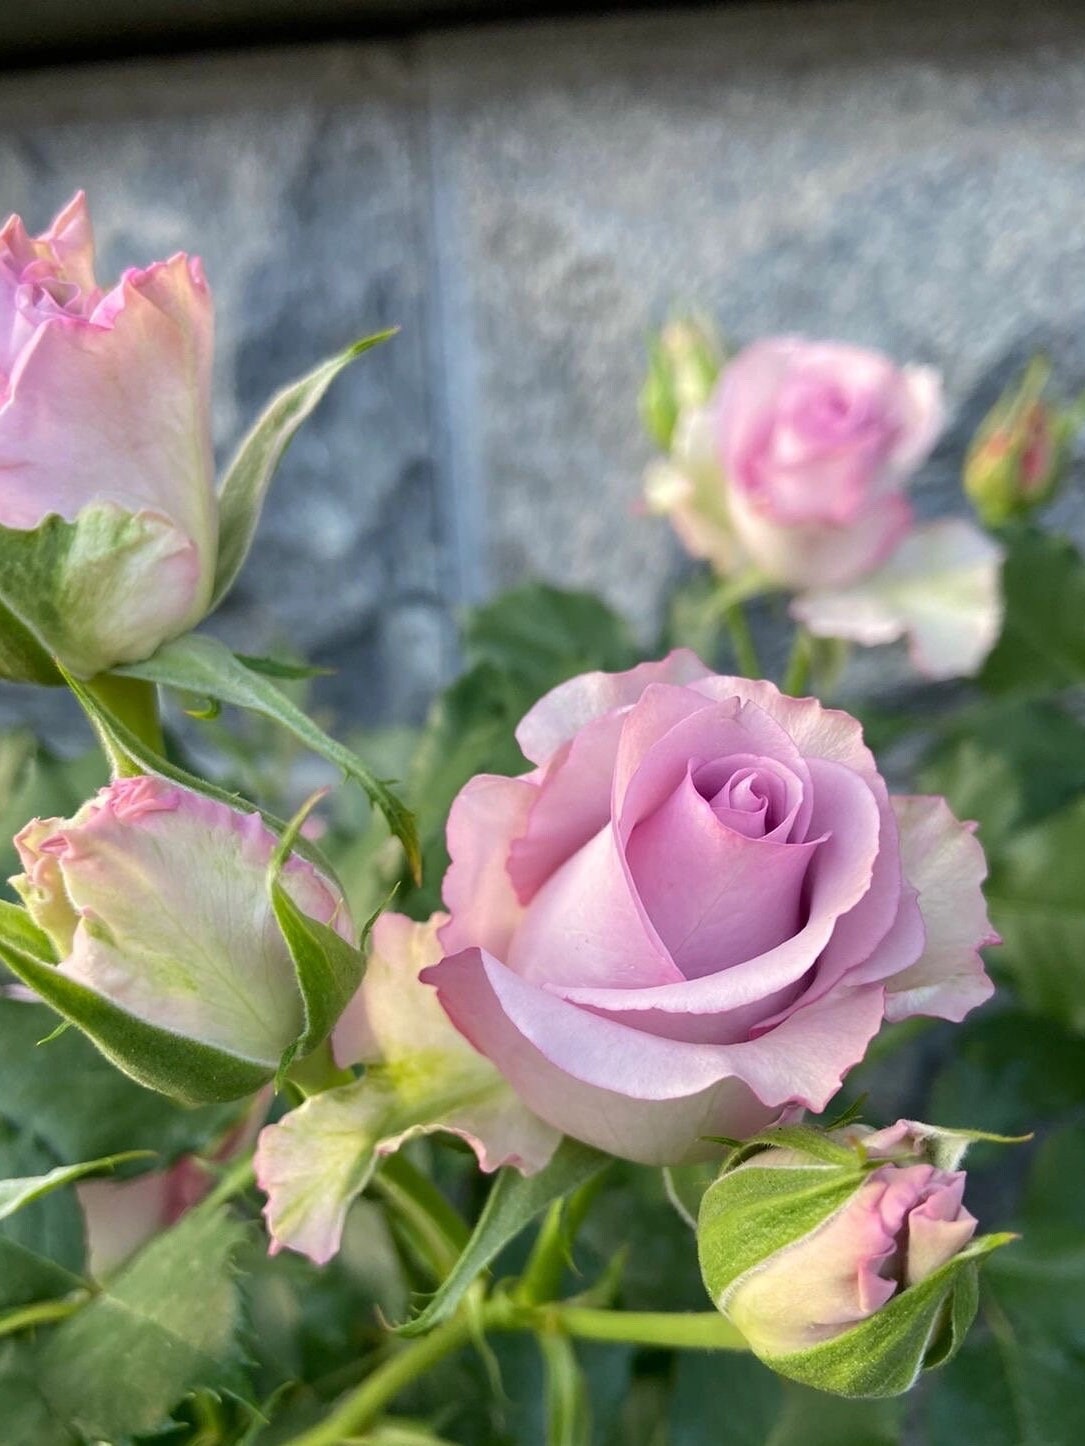 Rare Rose [Nightingale]-1 Gal OwnRoot New Varieties| Vintage Color| Heat resistance| Long Flowering| Cutting| Fetching|Sumptuous 紫霞仙子 Netherlands